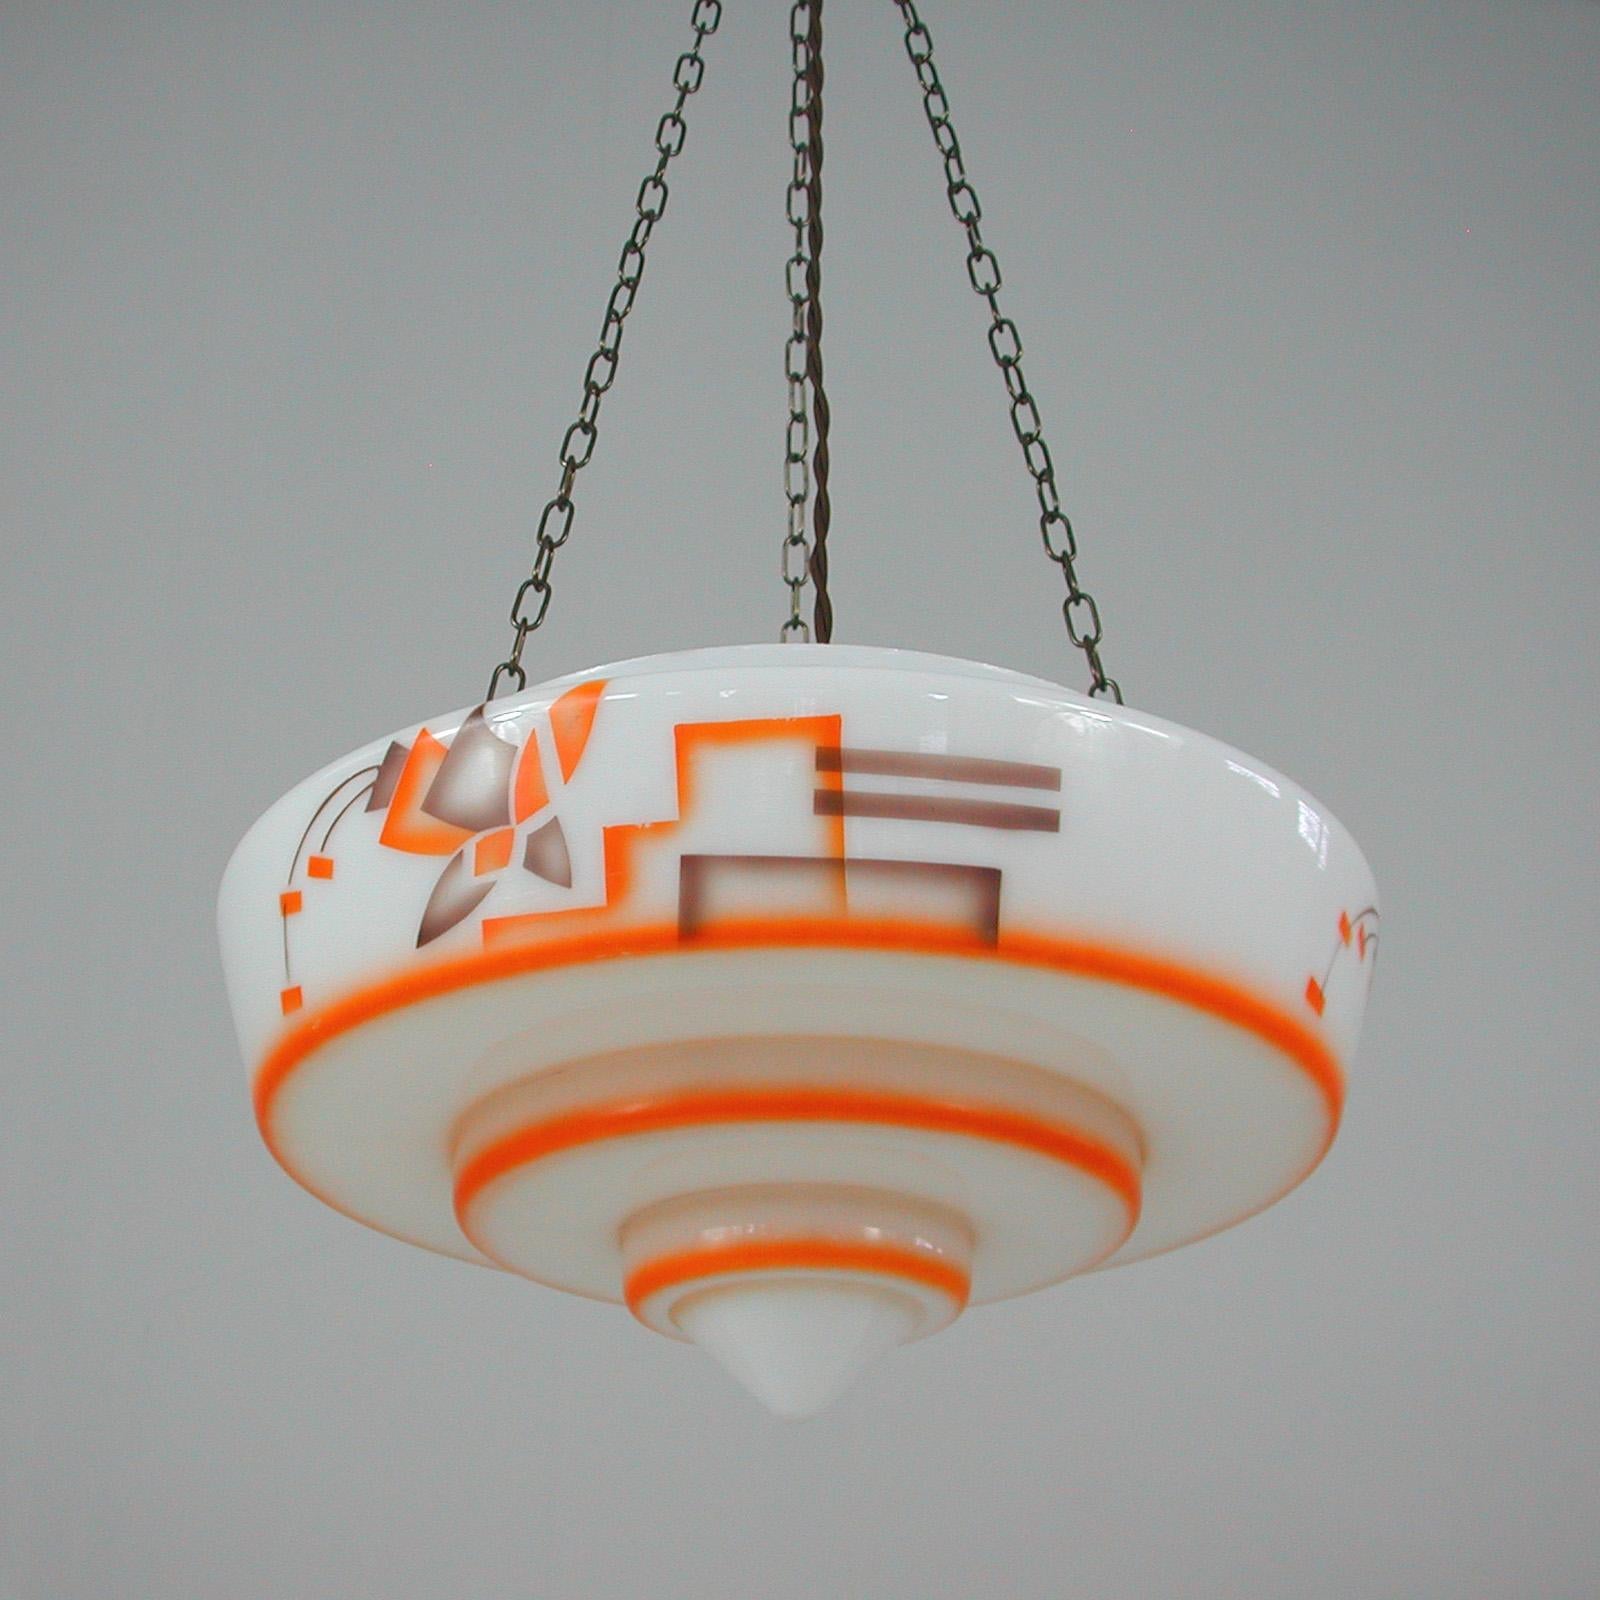 German Art Deco Suspension Light, Enameled Glass and Brass, 1930s For Sale 1